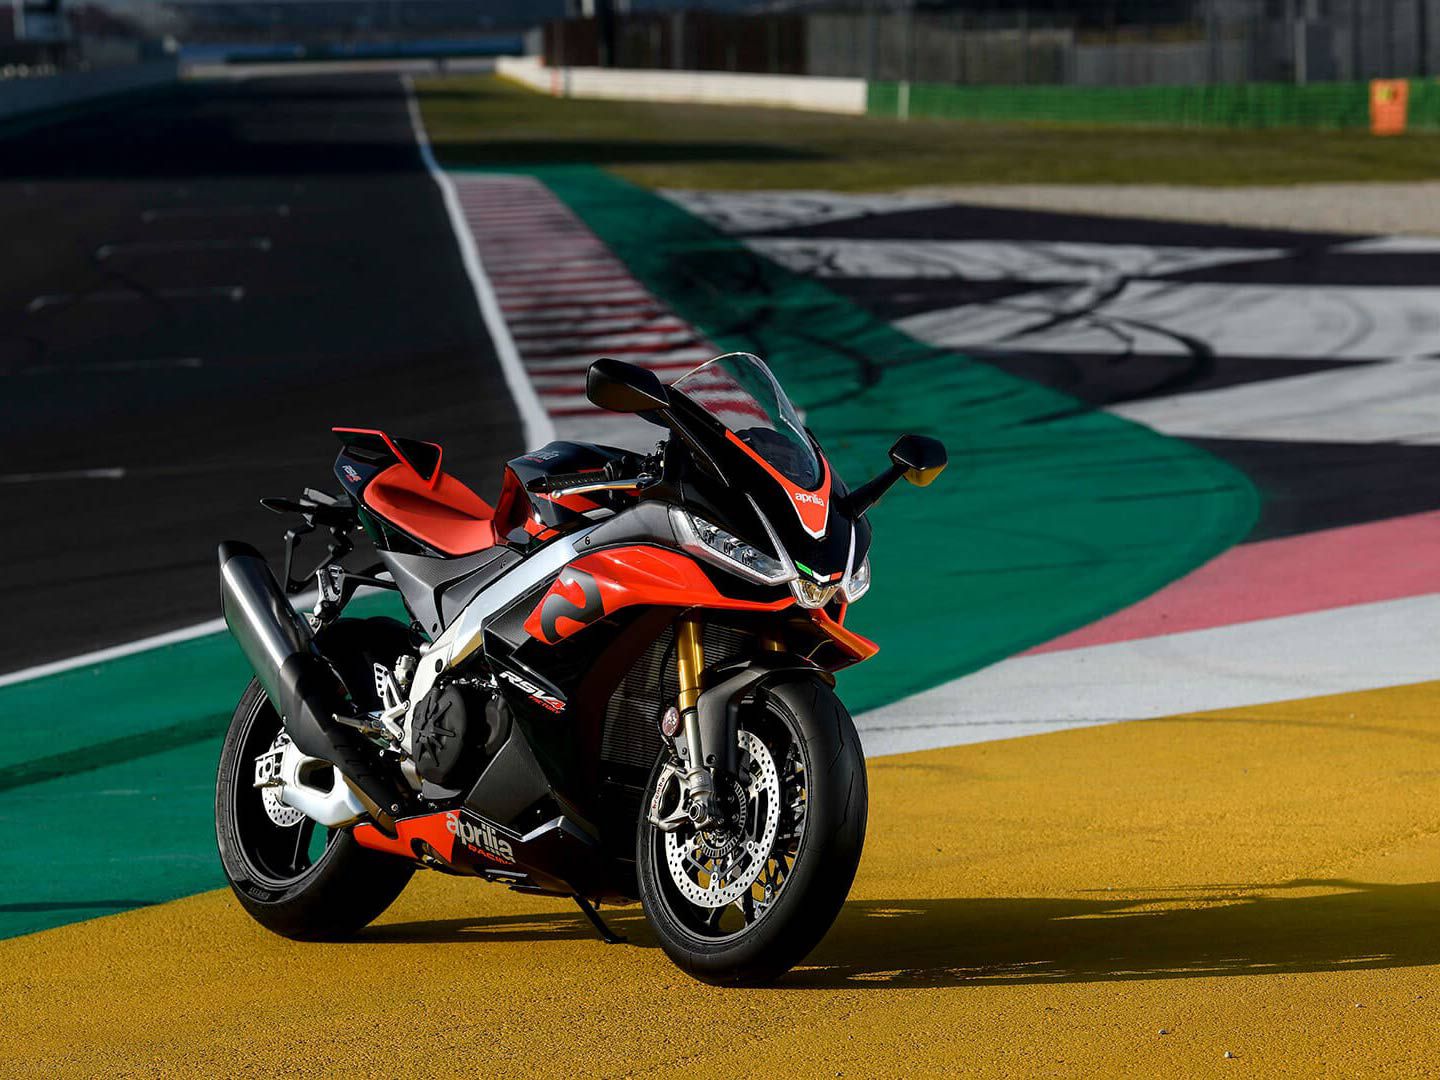 Numbers don’t tell the full story; The Aprilia’s V4 sings a song of its own.